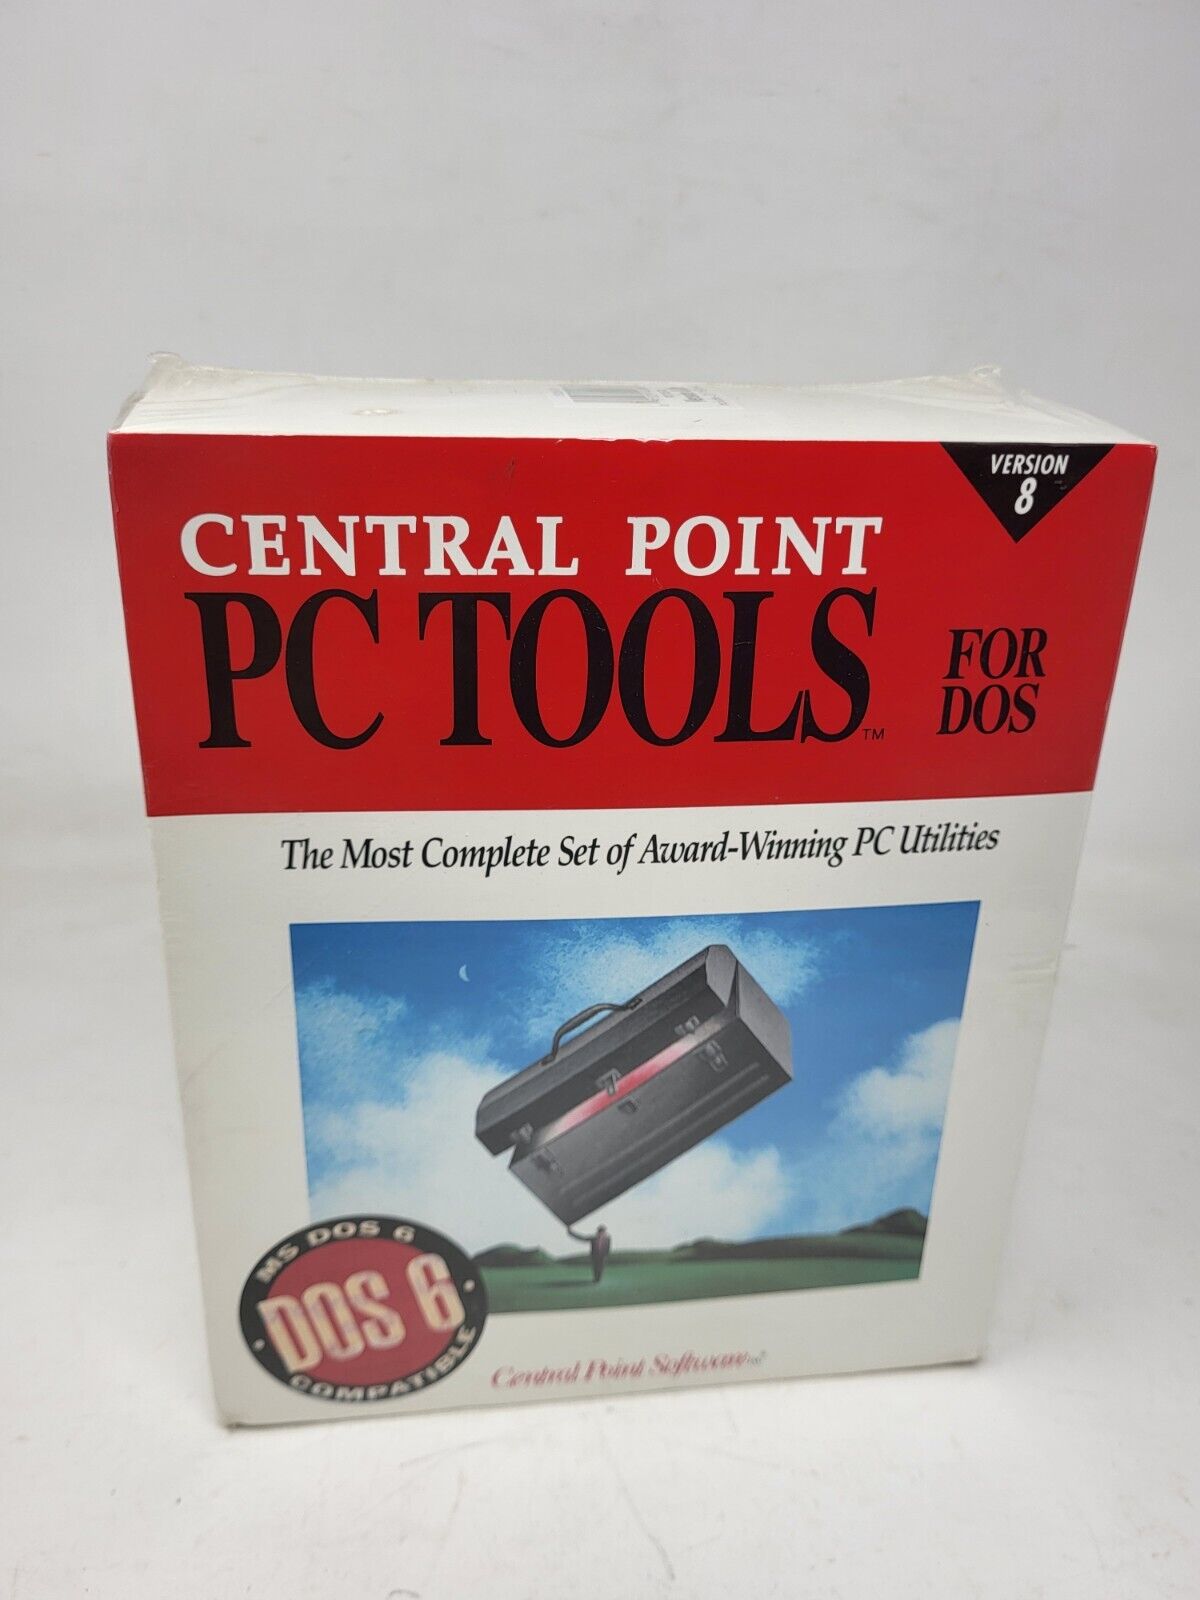 Central Point PC Tools Version 8 for DOS with Manuals and 3.5